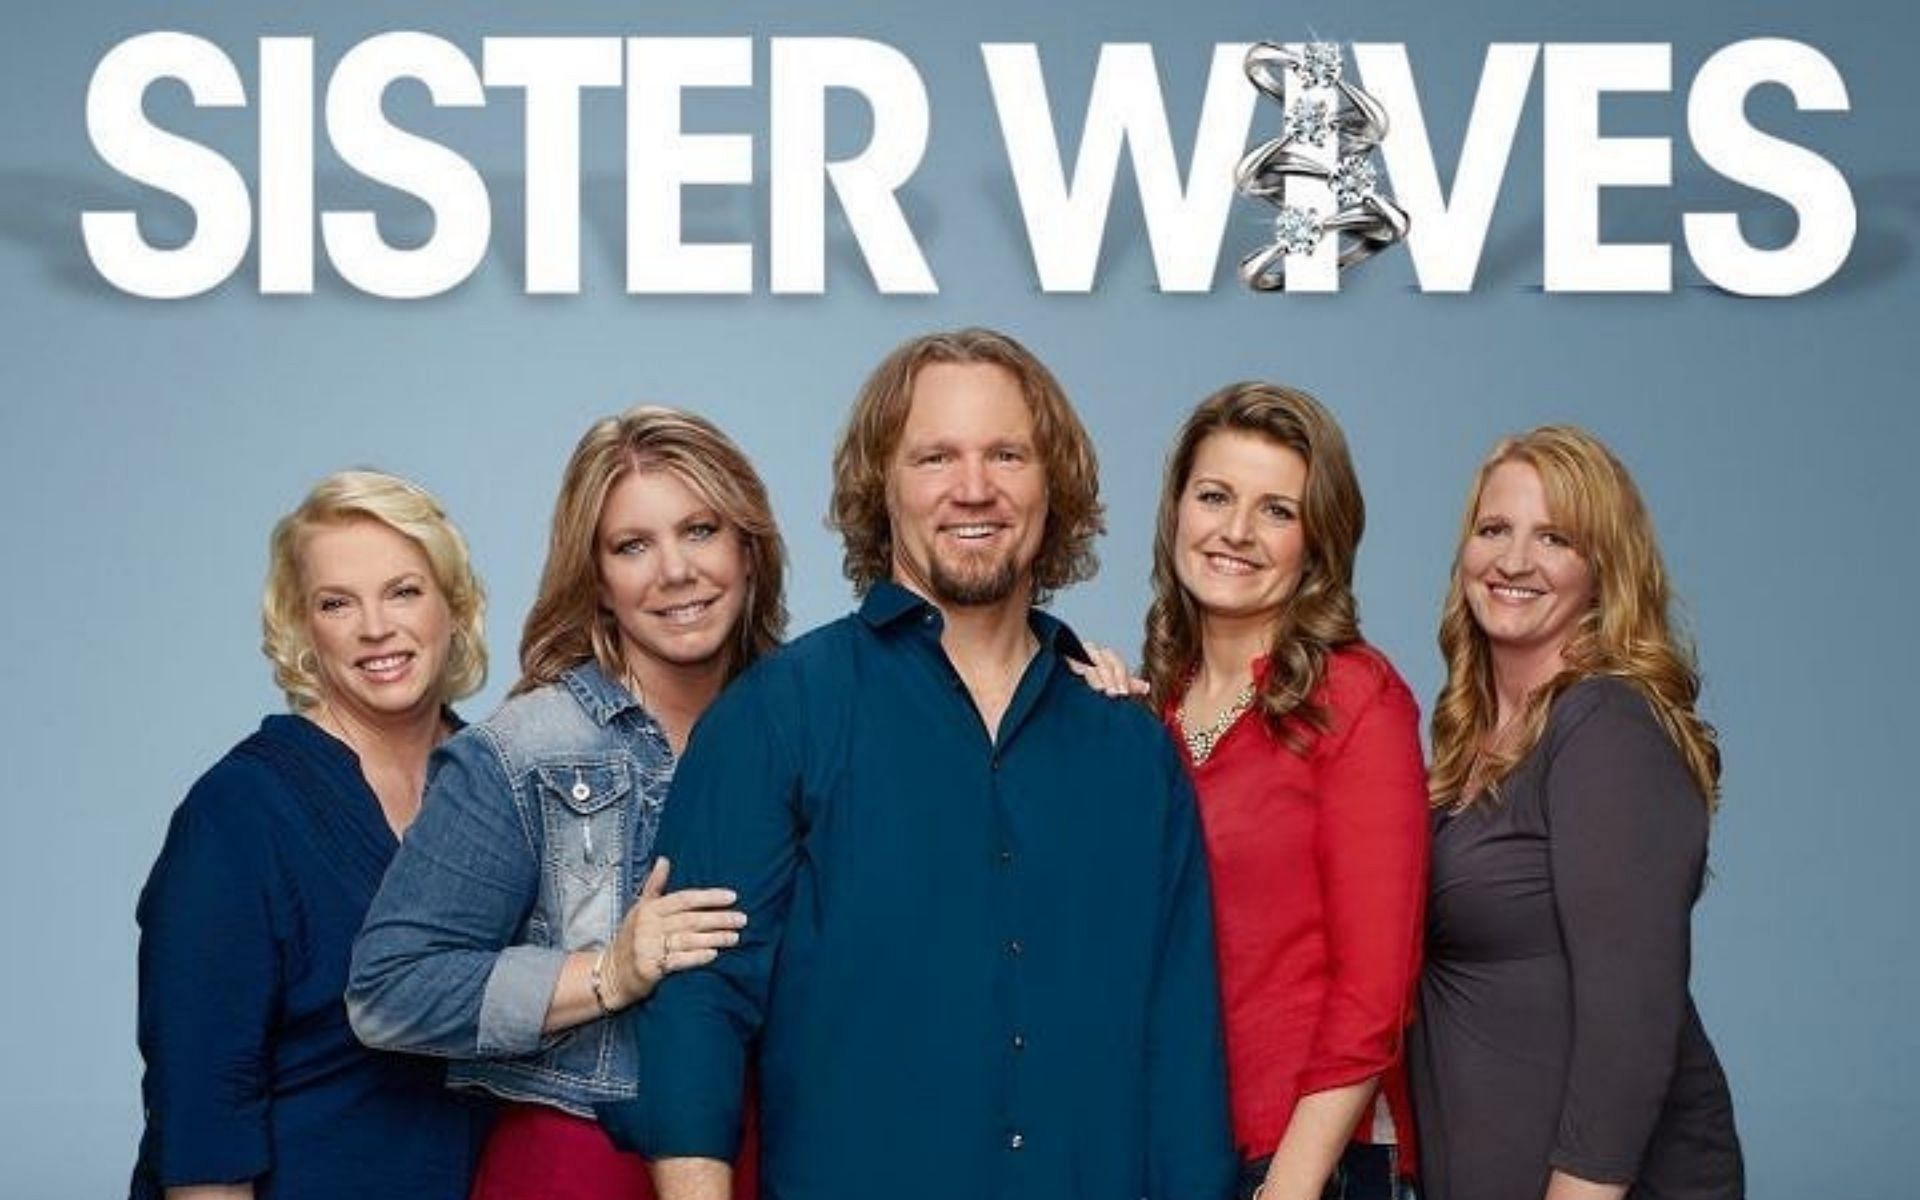 What Religion Are the 'Sister Wives'? Polygamous Beliefs